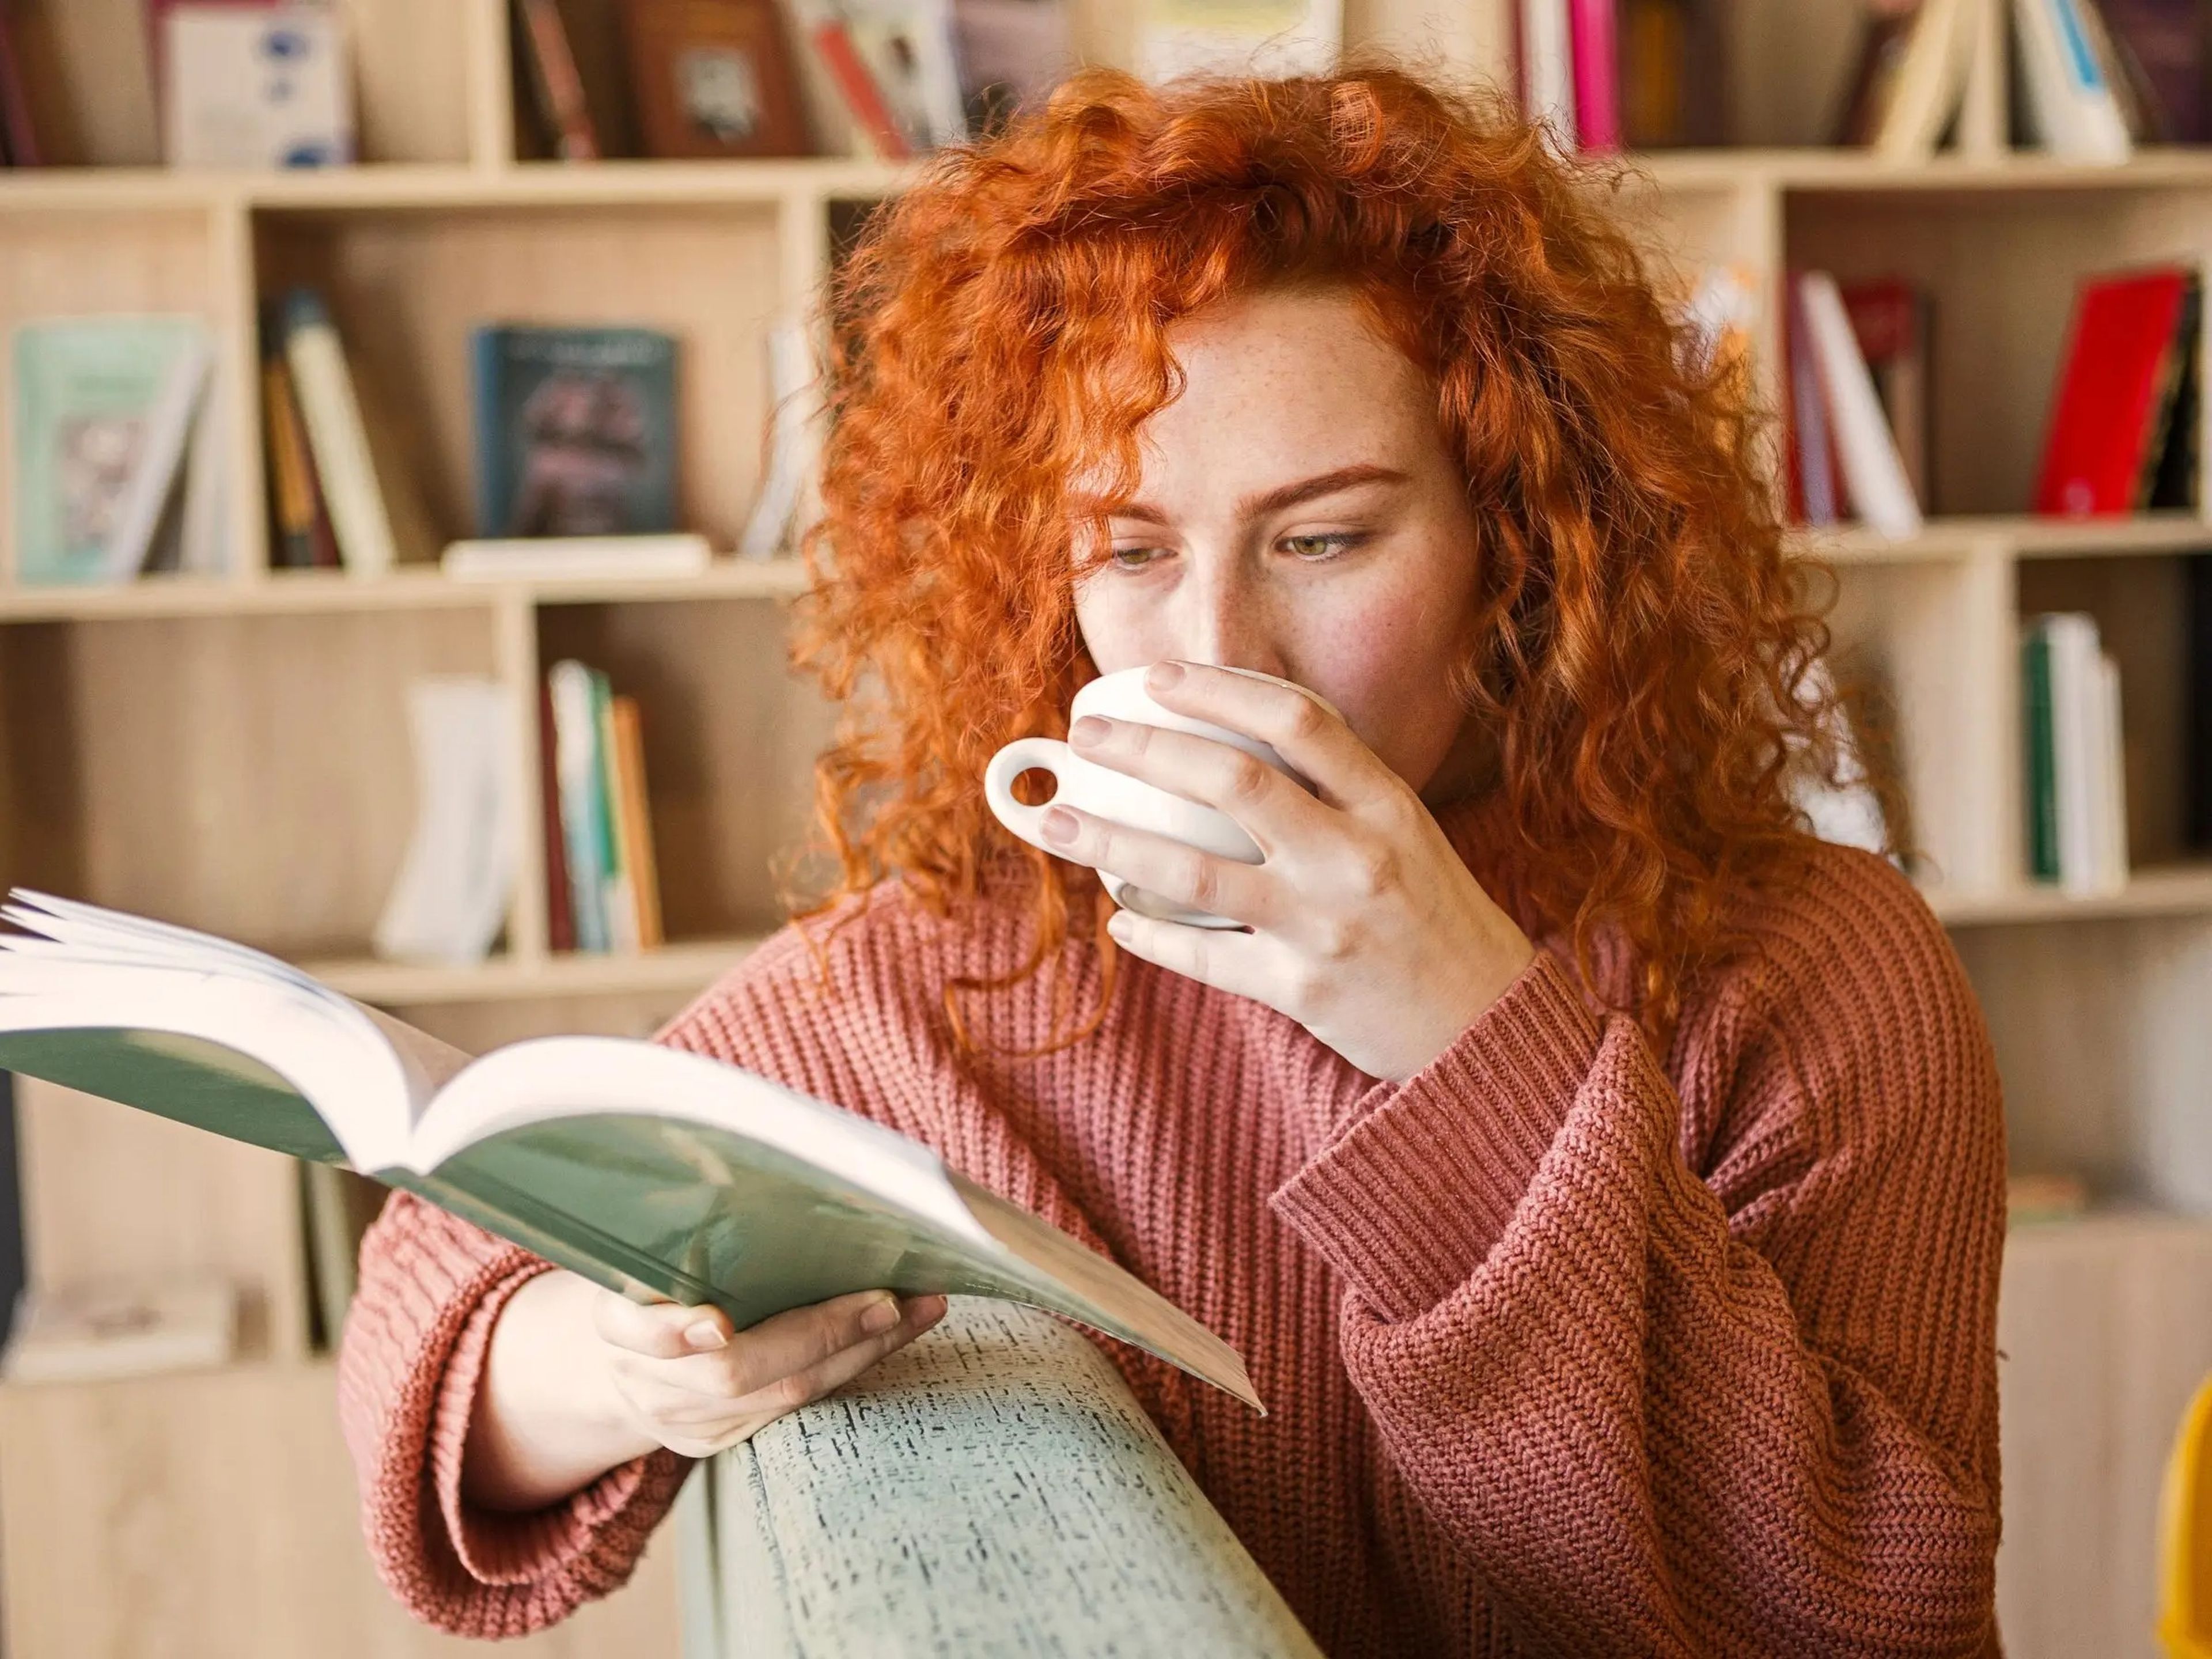 A woman reading a book and drinking coffee.